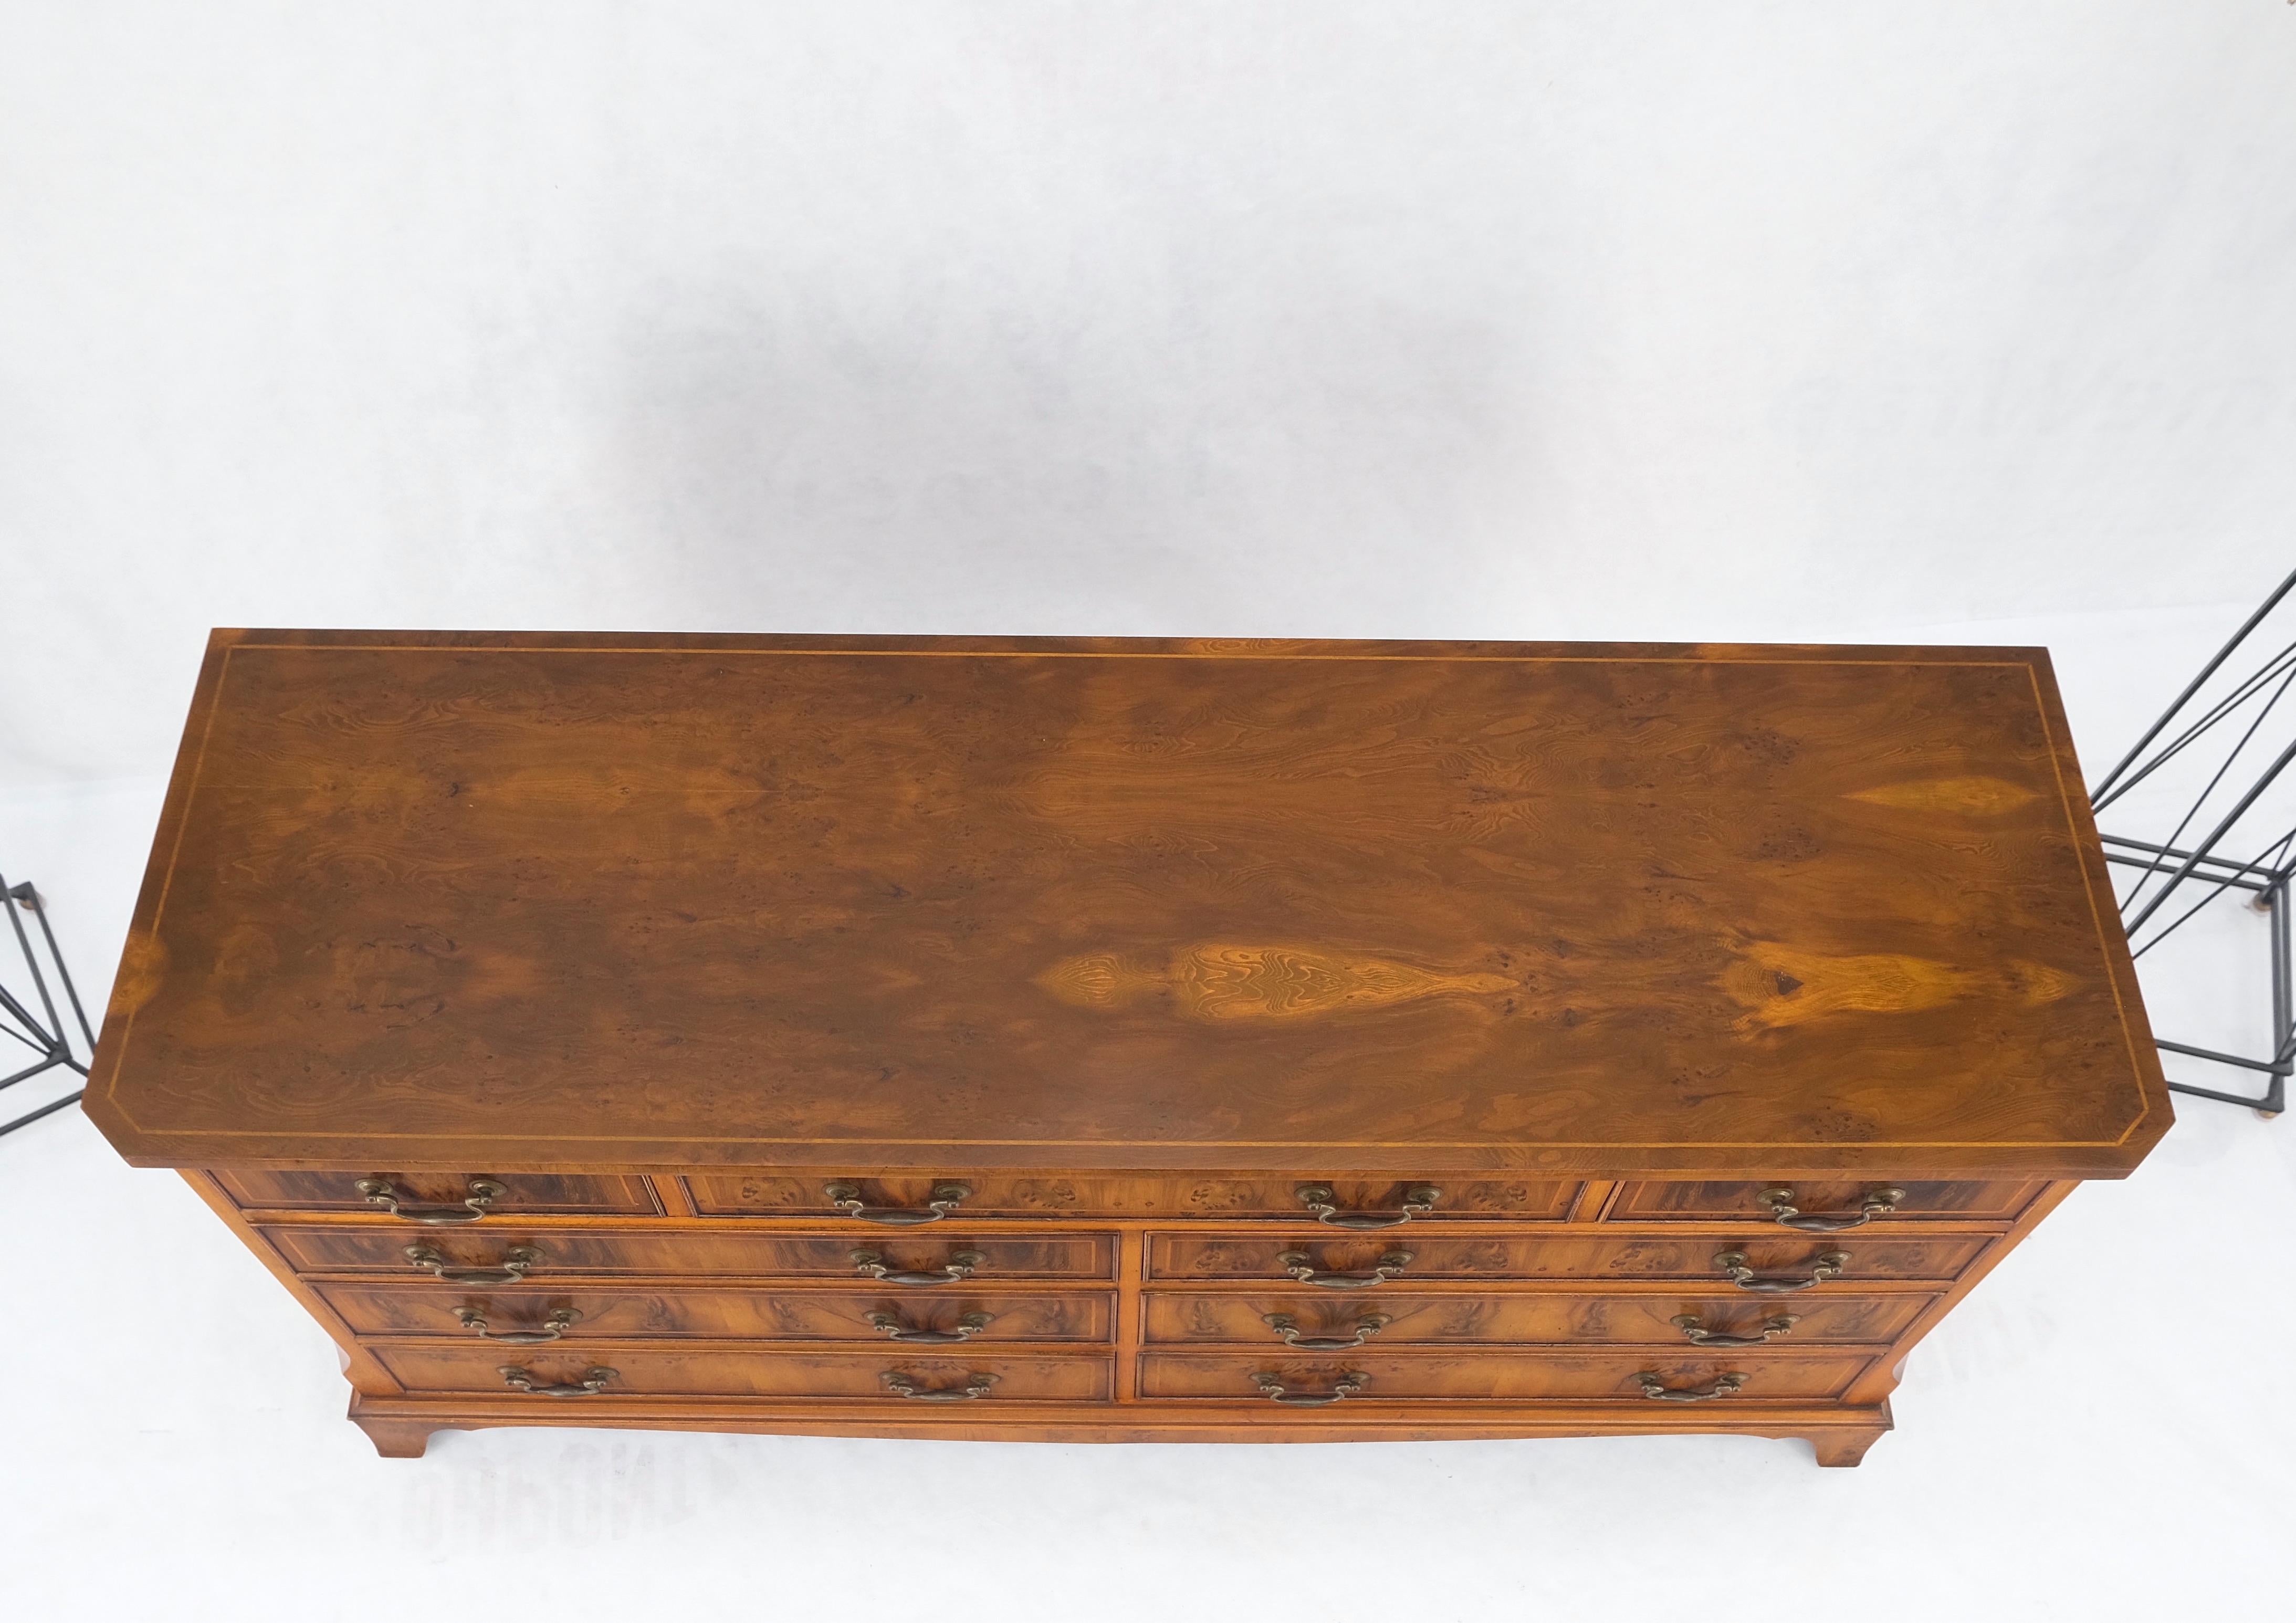 Yew Wood Long 9 Drawers Long Pencil Inlaid Dresser Credenza Brass Drops MINT! In Good Condition For Sale In Rockaway, NJ